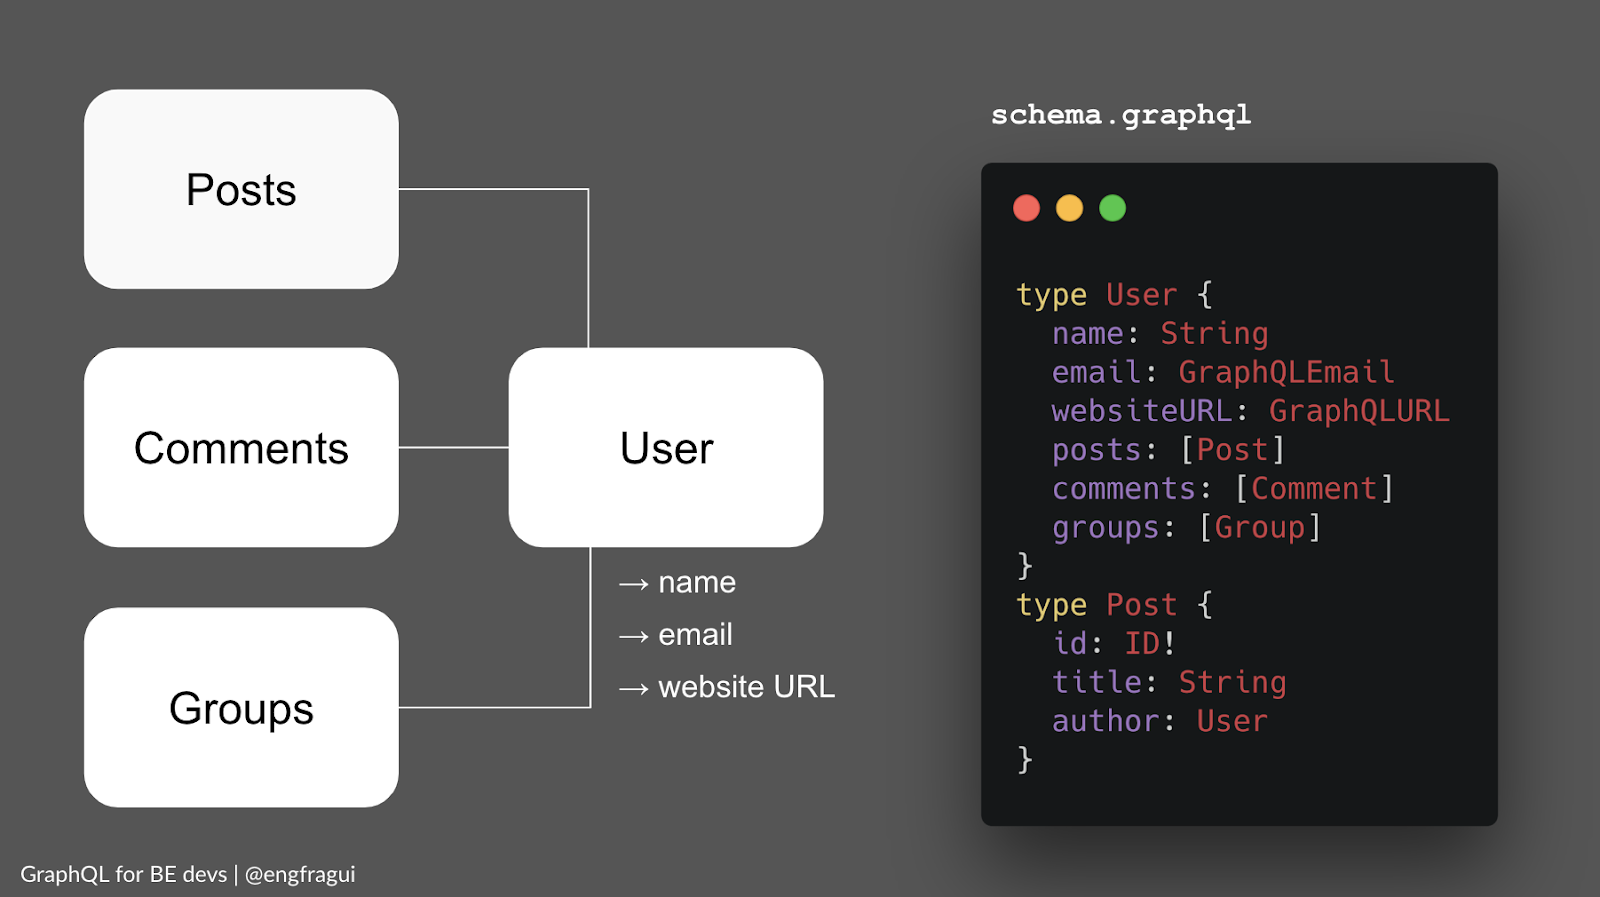 GraphQL schema example with relationship between user, and posts, comments, groups related to that user